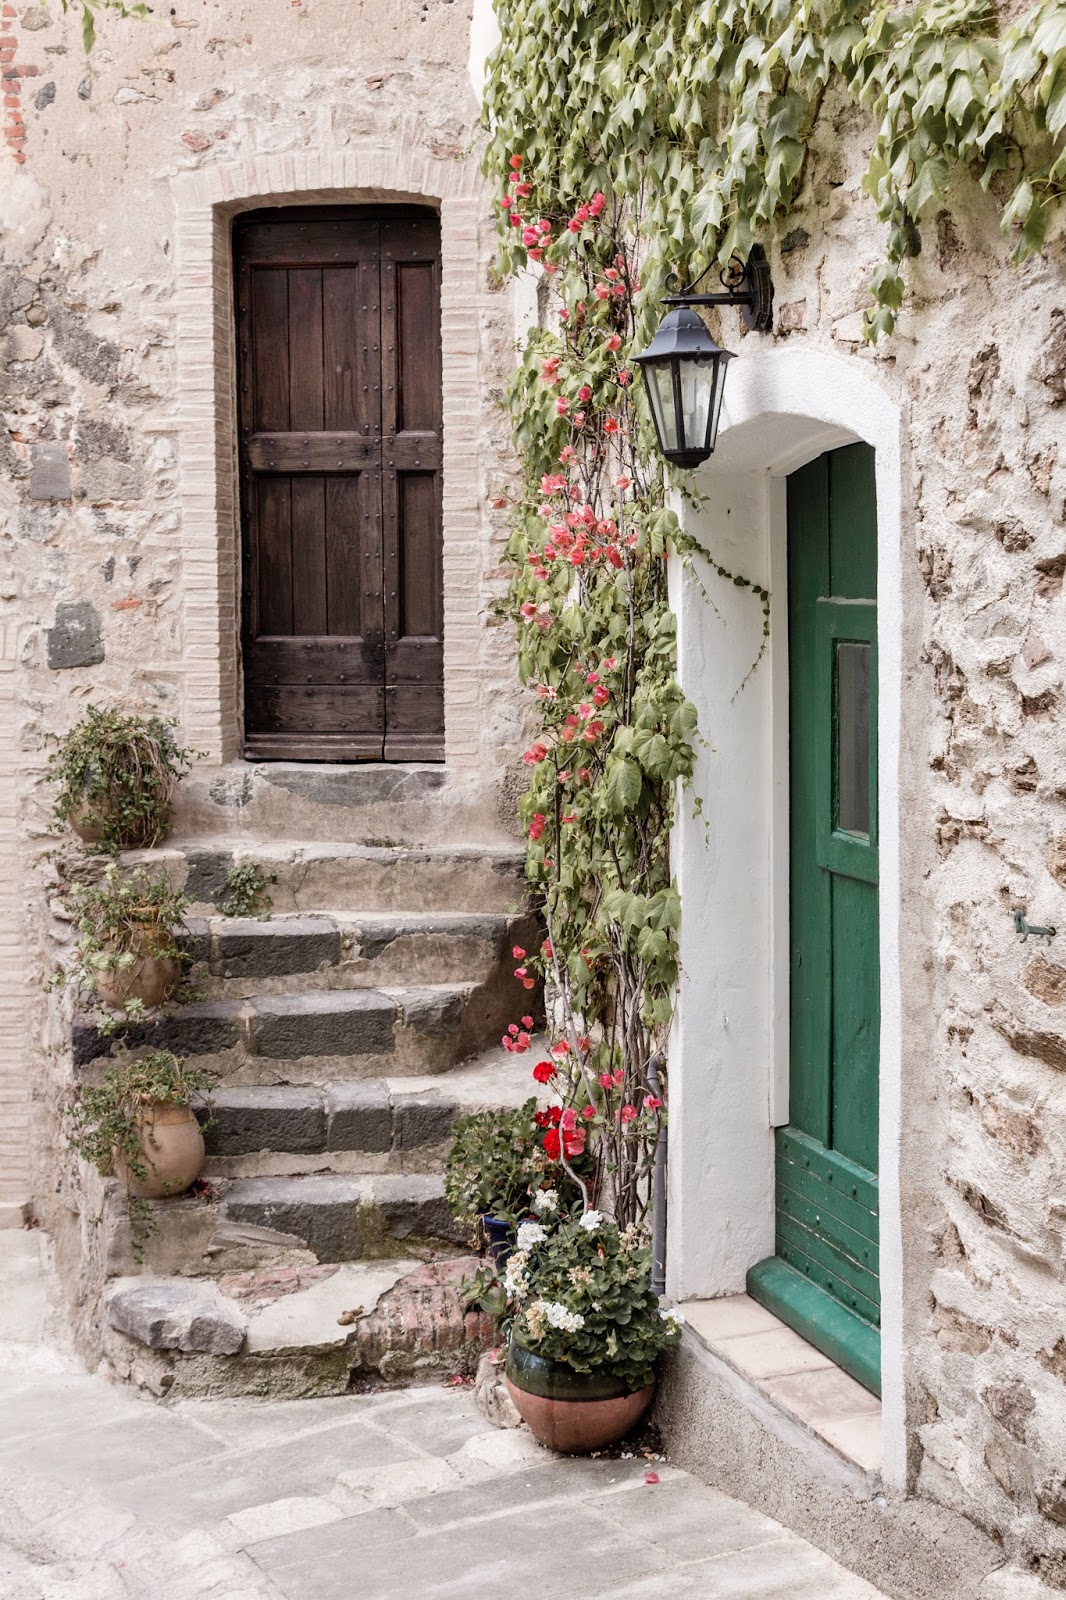 Rustic French Country Doors in Provence and gorgeous curb appeal with climbing vines, crumbling stone, and weathered age. Photo: The Flying Dutchwoman. 